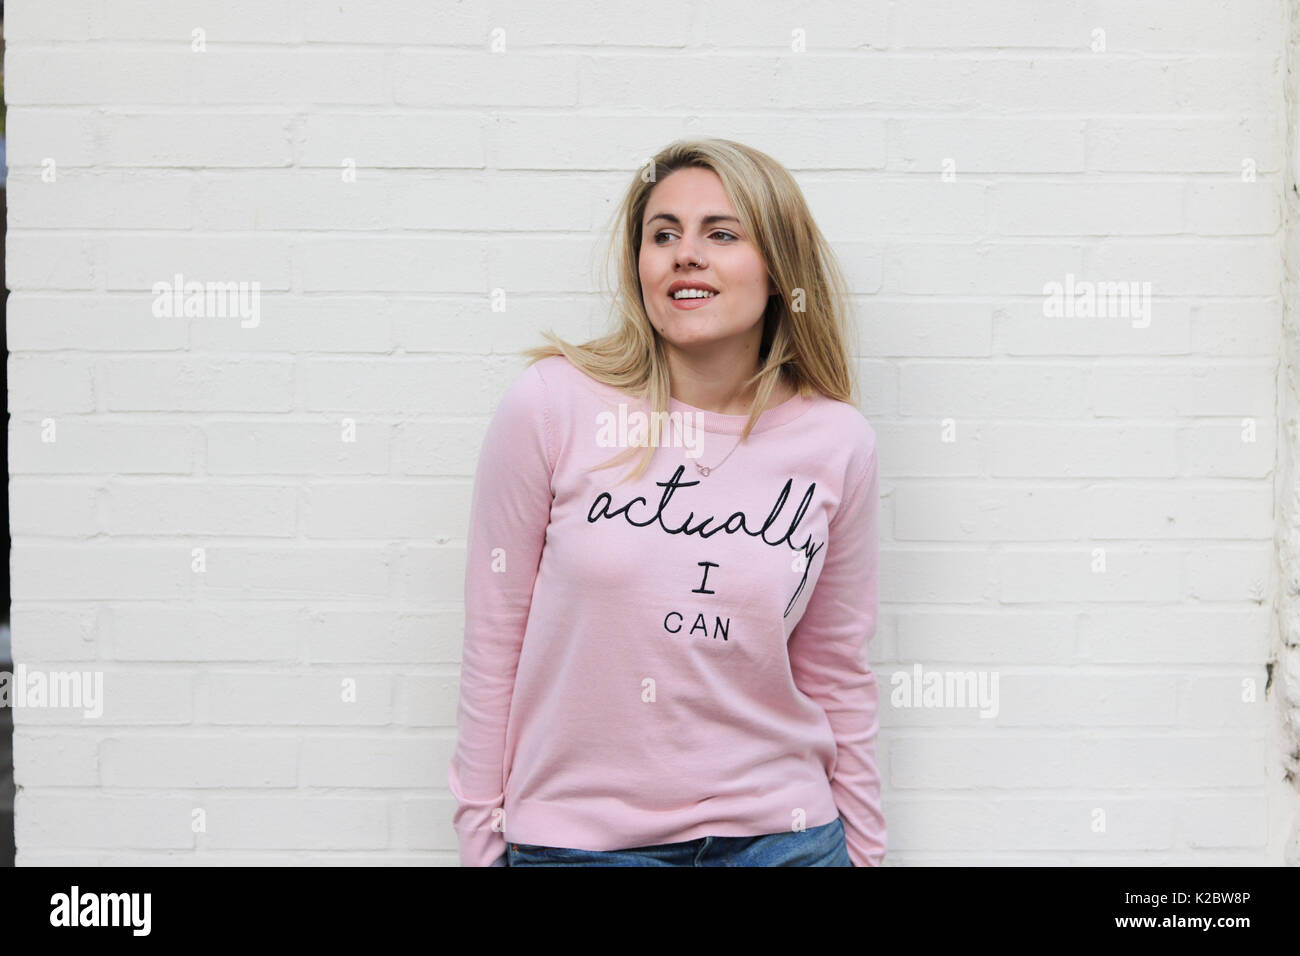 Young blonde woman in her early twenties wearing motivational jumper Stock Photo